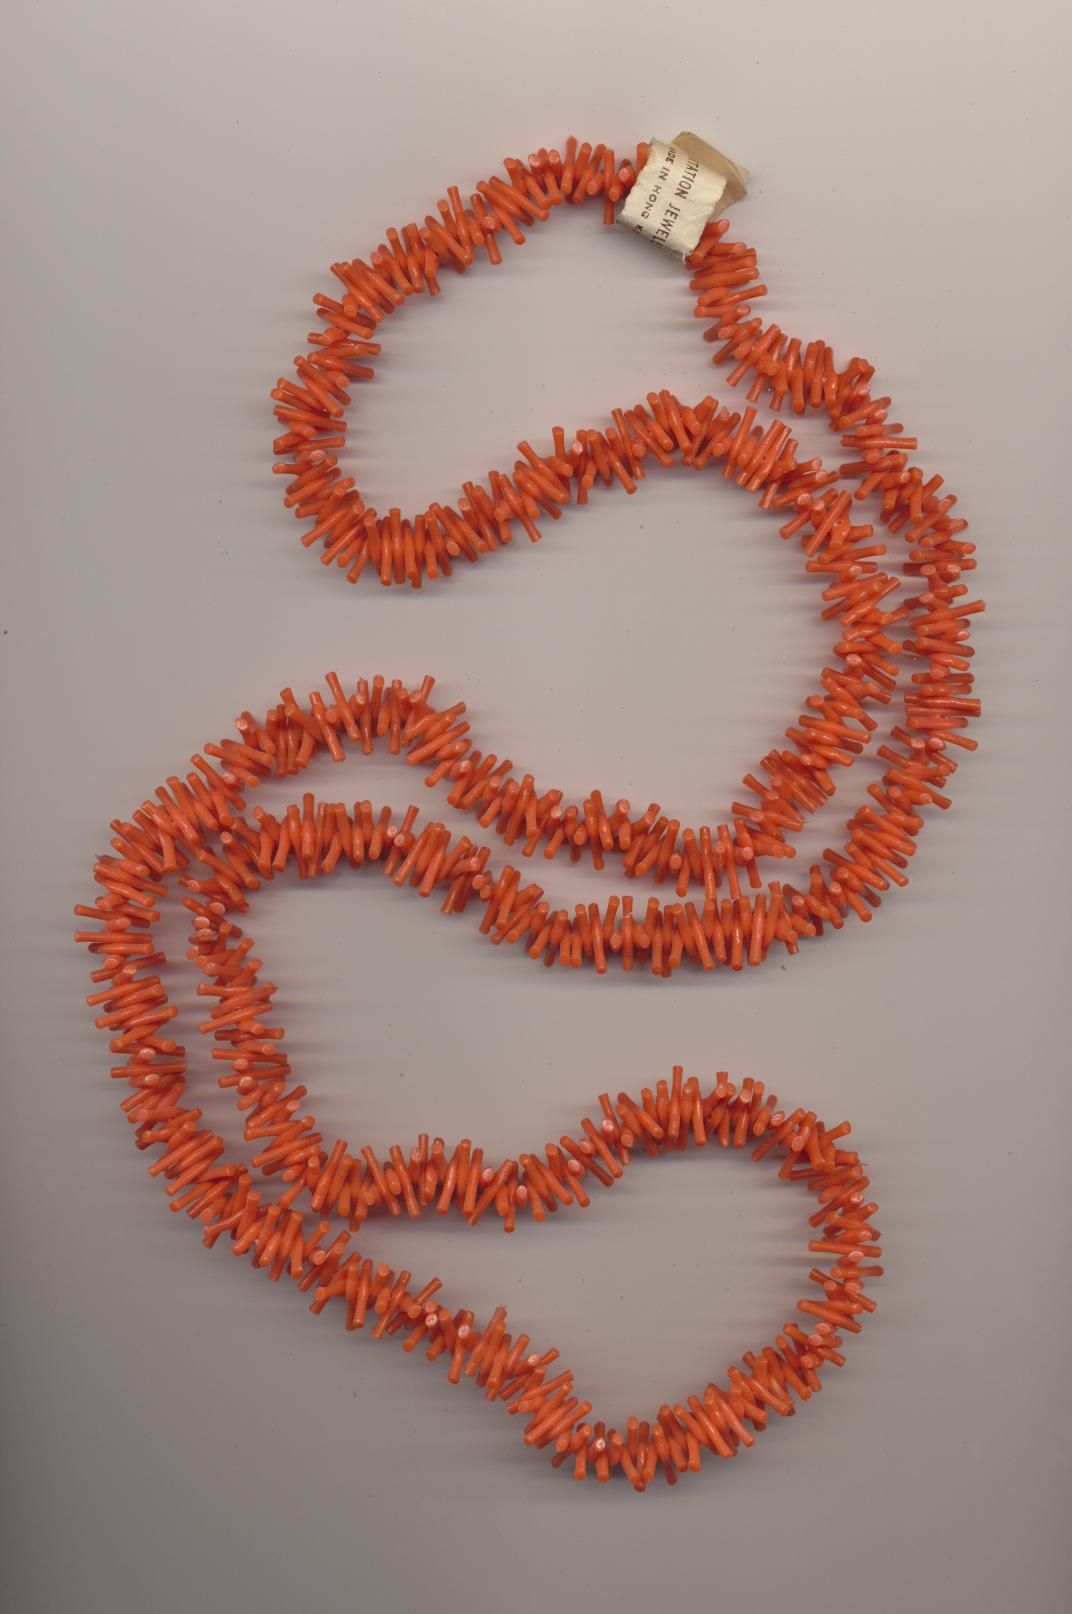 Necklace made of plastic imitation red branch coral, made in Hong Kong, 1980's, length 41'' 104cm.